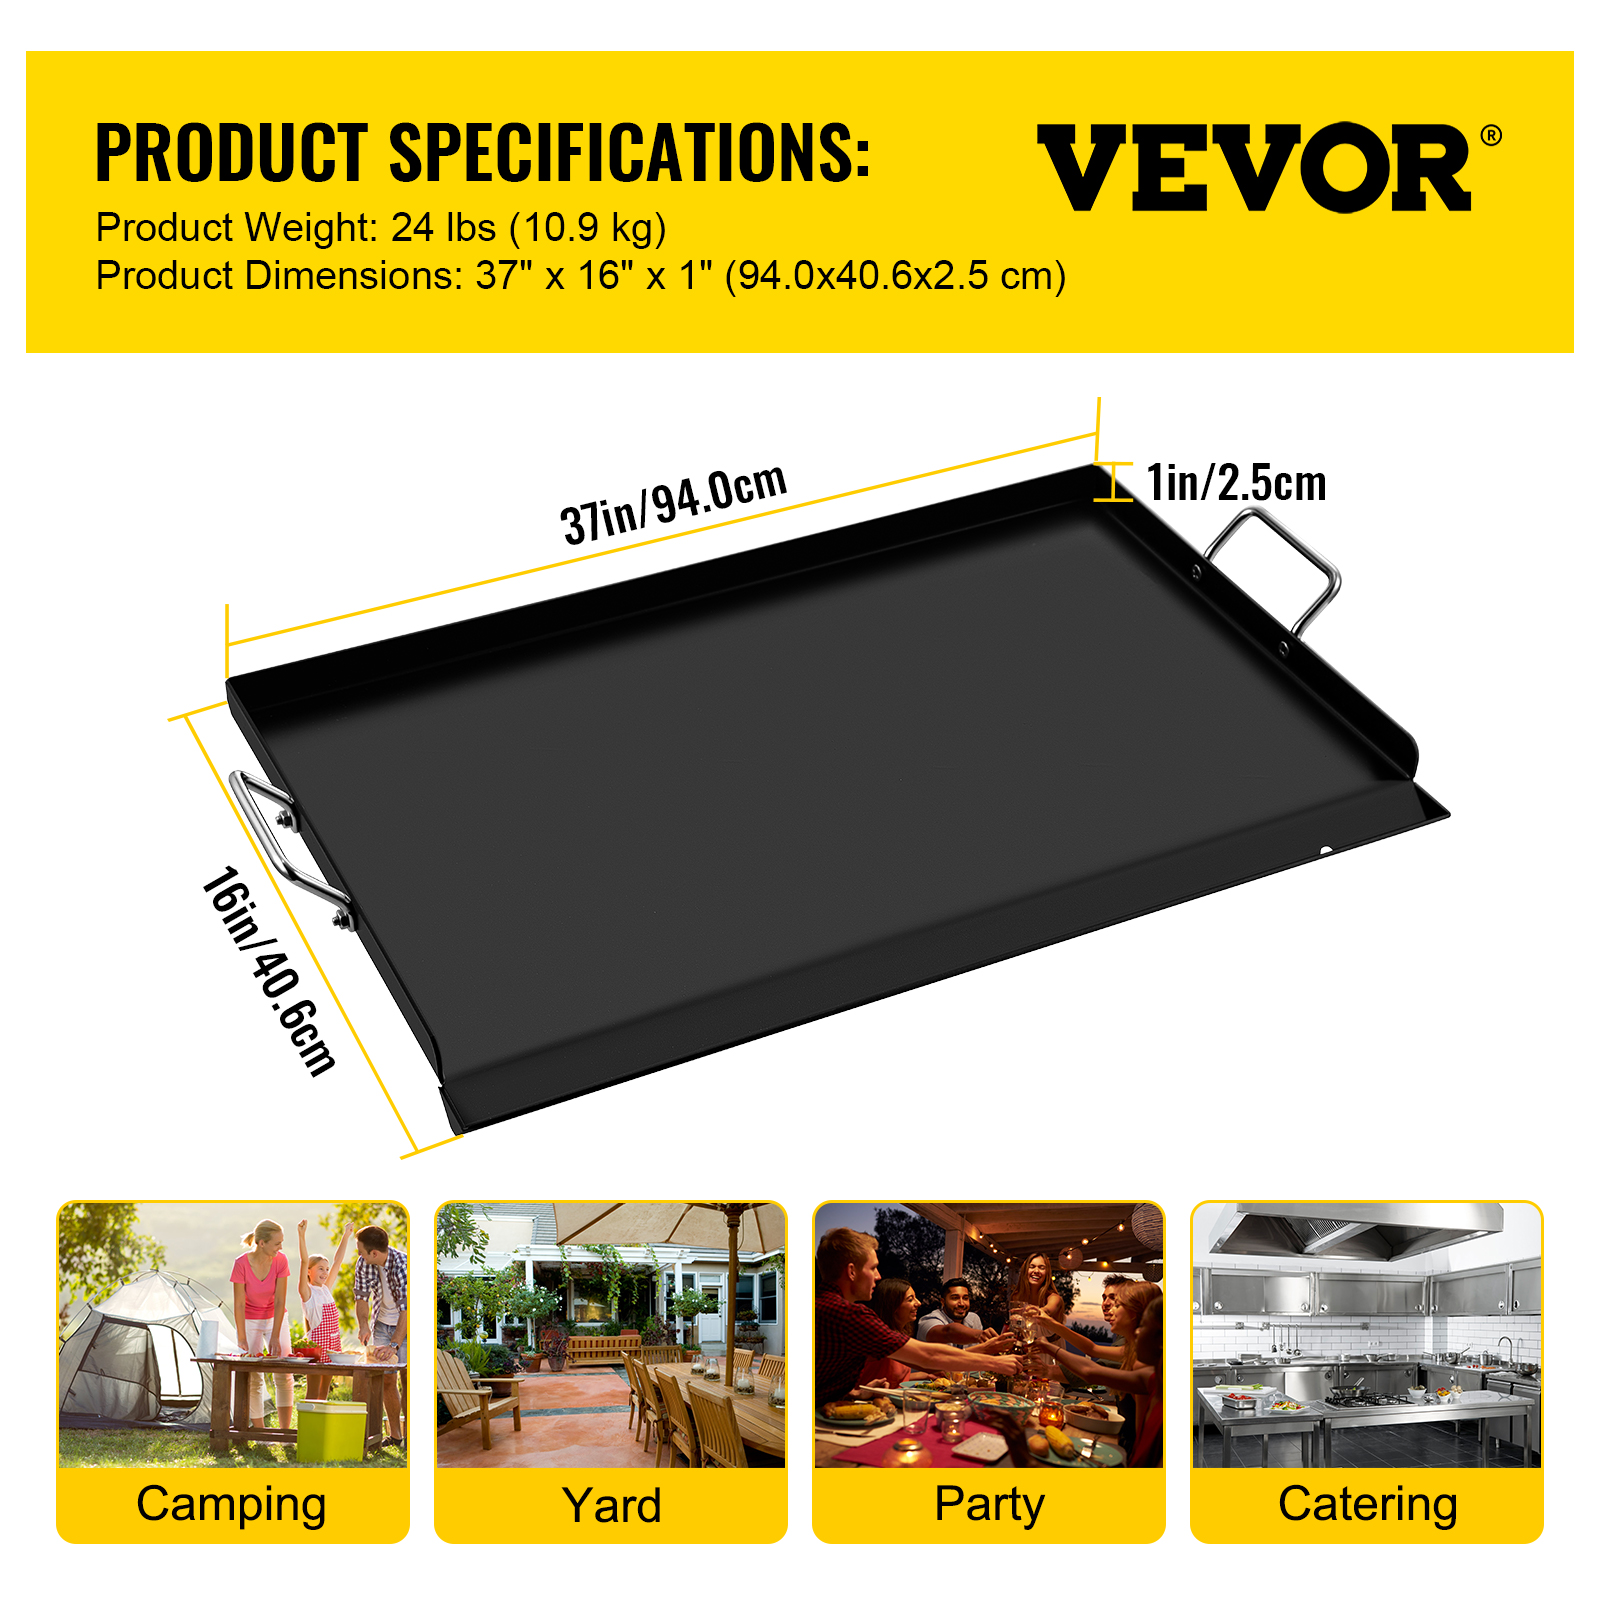 VEVOR Flat Top Griddle For Gas Grill Solid Flat Top Grill Stove 17